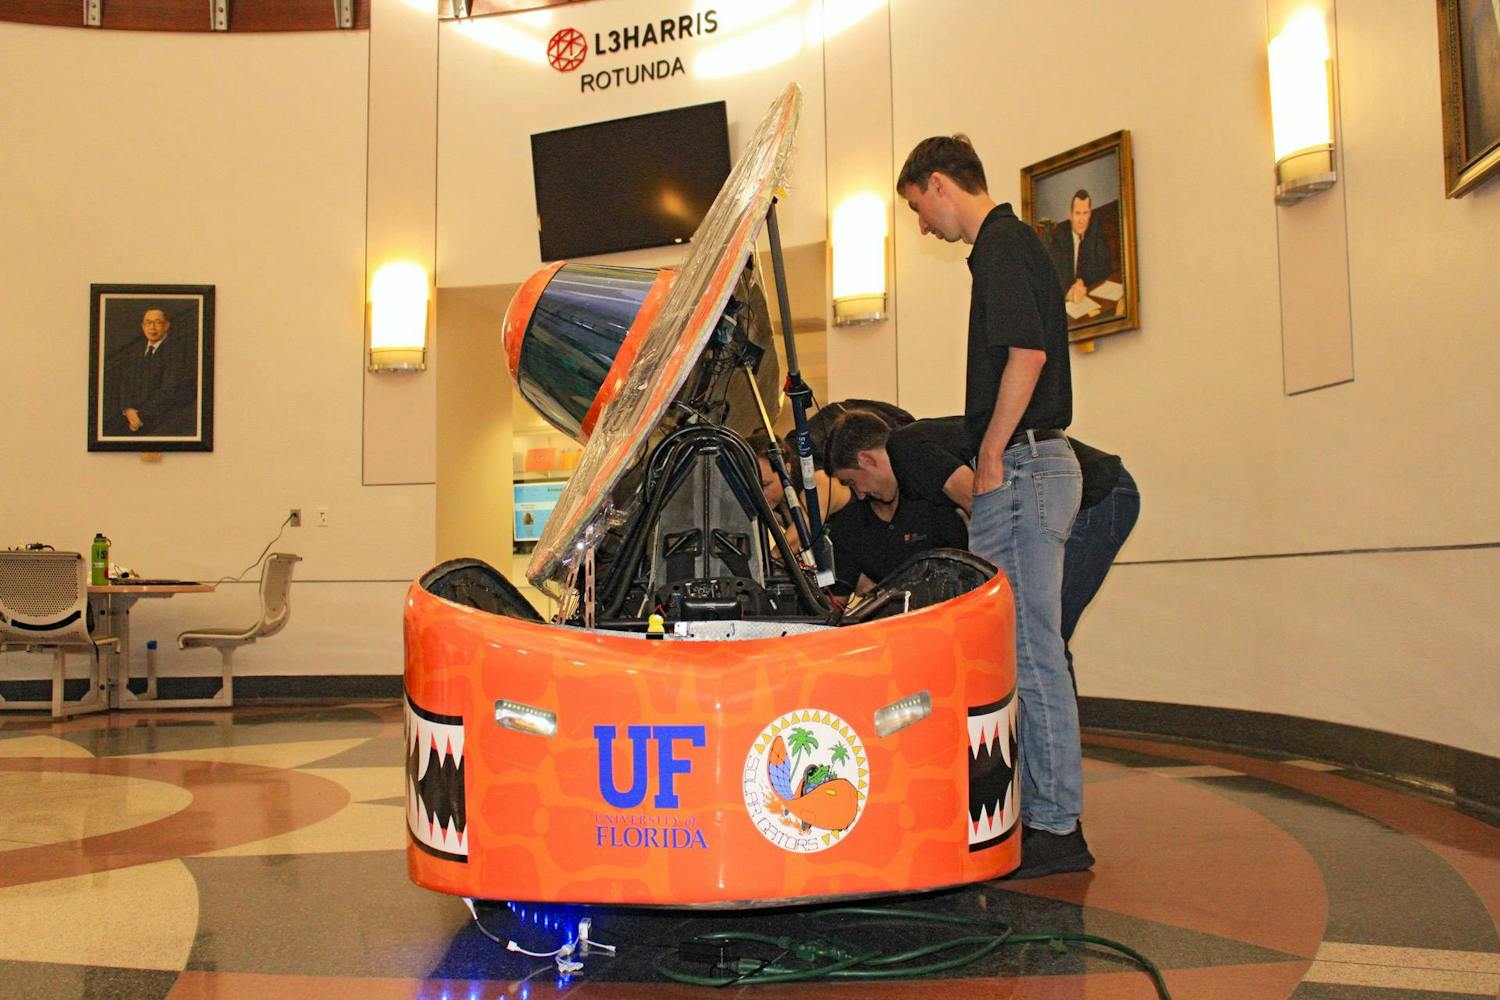 After years of hard work and engineering obstacles, the Solar Gators revealed their newest solar-powered car at UF’s New Engineering Building Thursday. The car is set to compete at the Formula Sun Grand Prix at Topeka, Kansas, throughout the week.&nbsp;
Designed and assembled completely by UF students, the “Sunrider” can reach speeds up to 50 mph, and a single battery pack can power it through 200 miles.&nbsp;
The week-long competition consists of four days of scrutineering, where experts test and inspect every piece of the vehicle, followed by three days of racing. It’s a race of endurance where previous winners reached 700 miles through multiple battery packs. The team will compete against 14 other groups from across the United States and Canada. Irene Chung, president-elect of Solar Gators, said winning this competition will qualify them for larger competitions such as the American Solar Challenge. However, more hurdles await them at the racetrack, she said.&nbsp;
“As you start driving,” she said, “you start seeing things that you’ve never seen before, and you’ve got to debug and problem solve on the fly.”